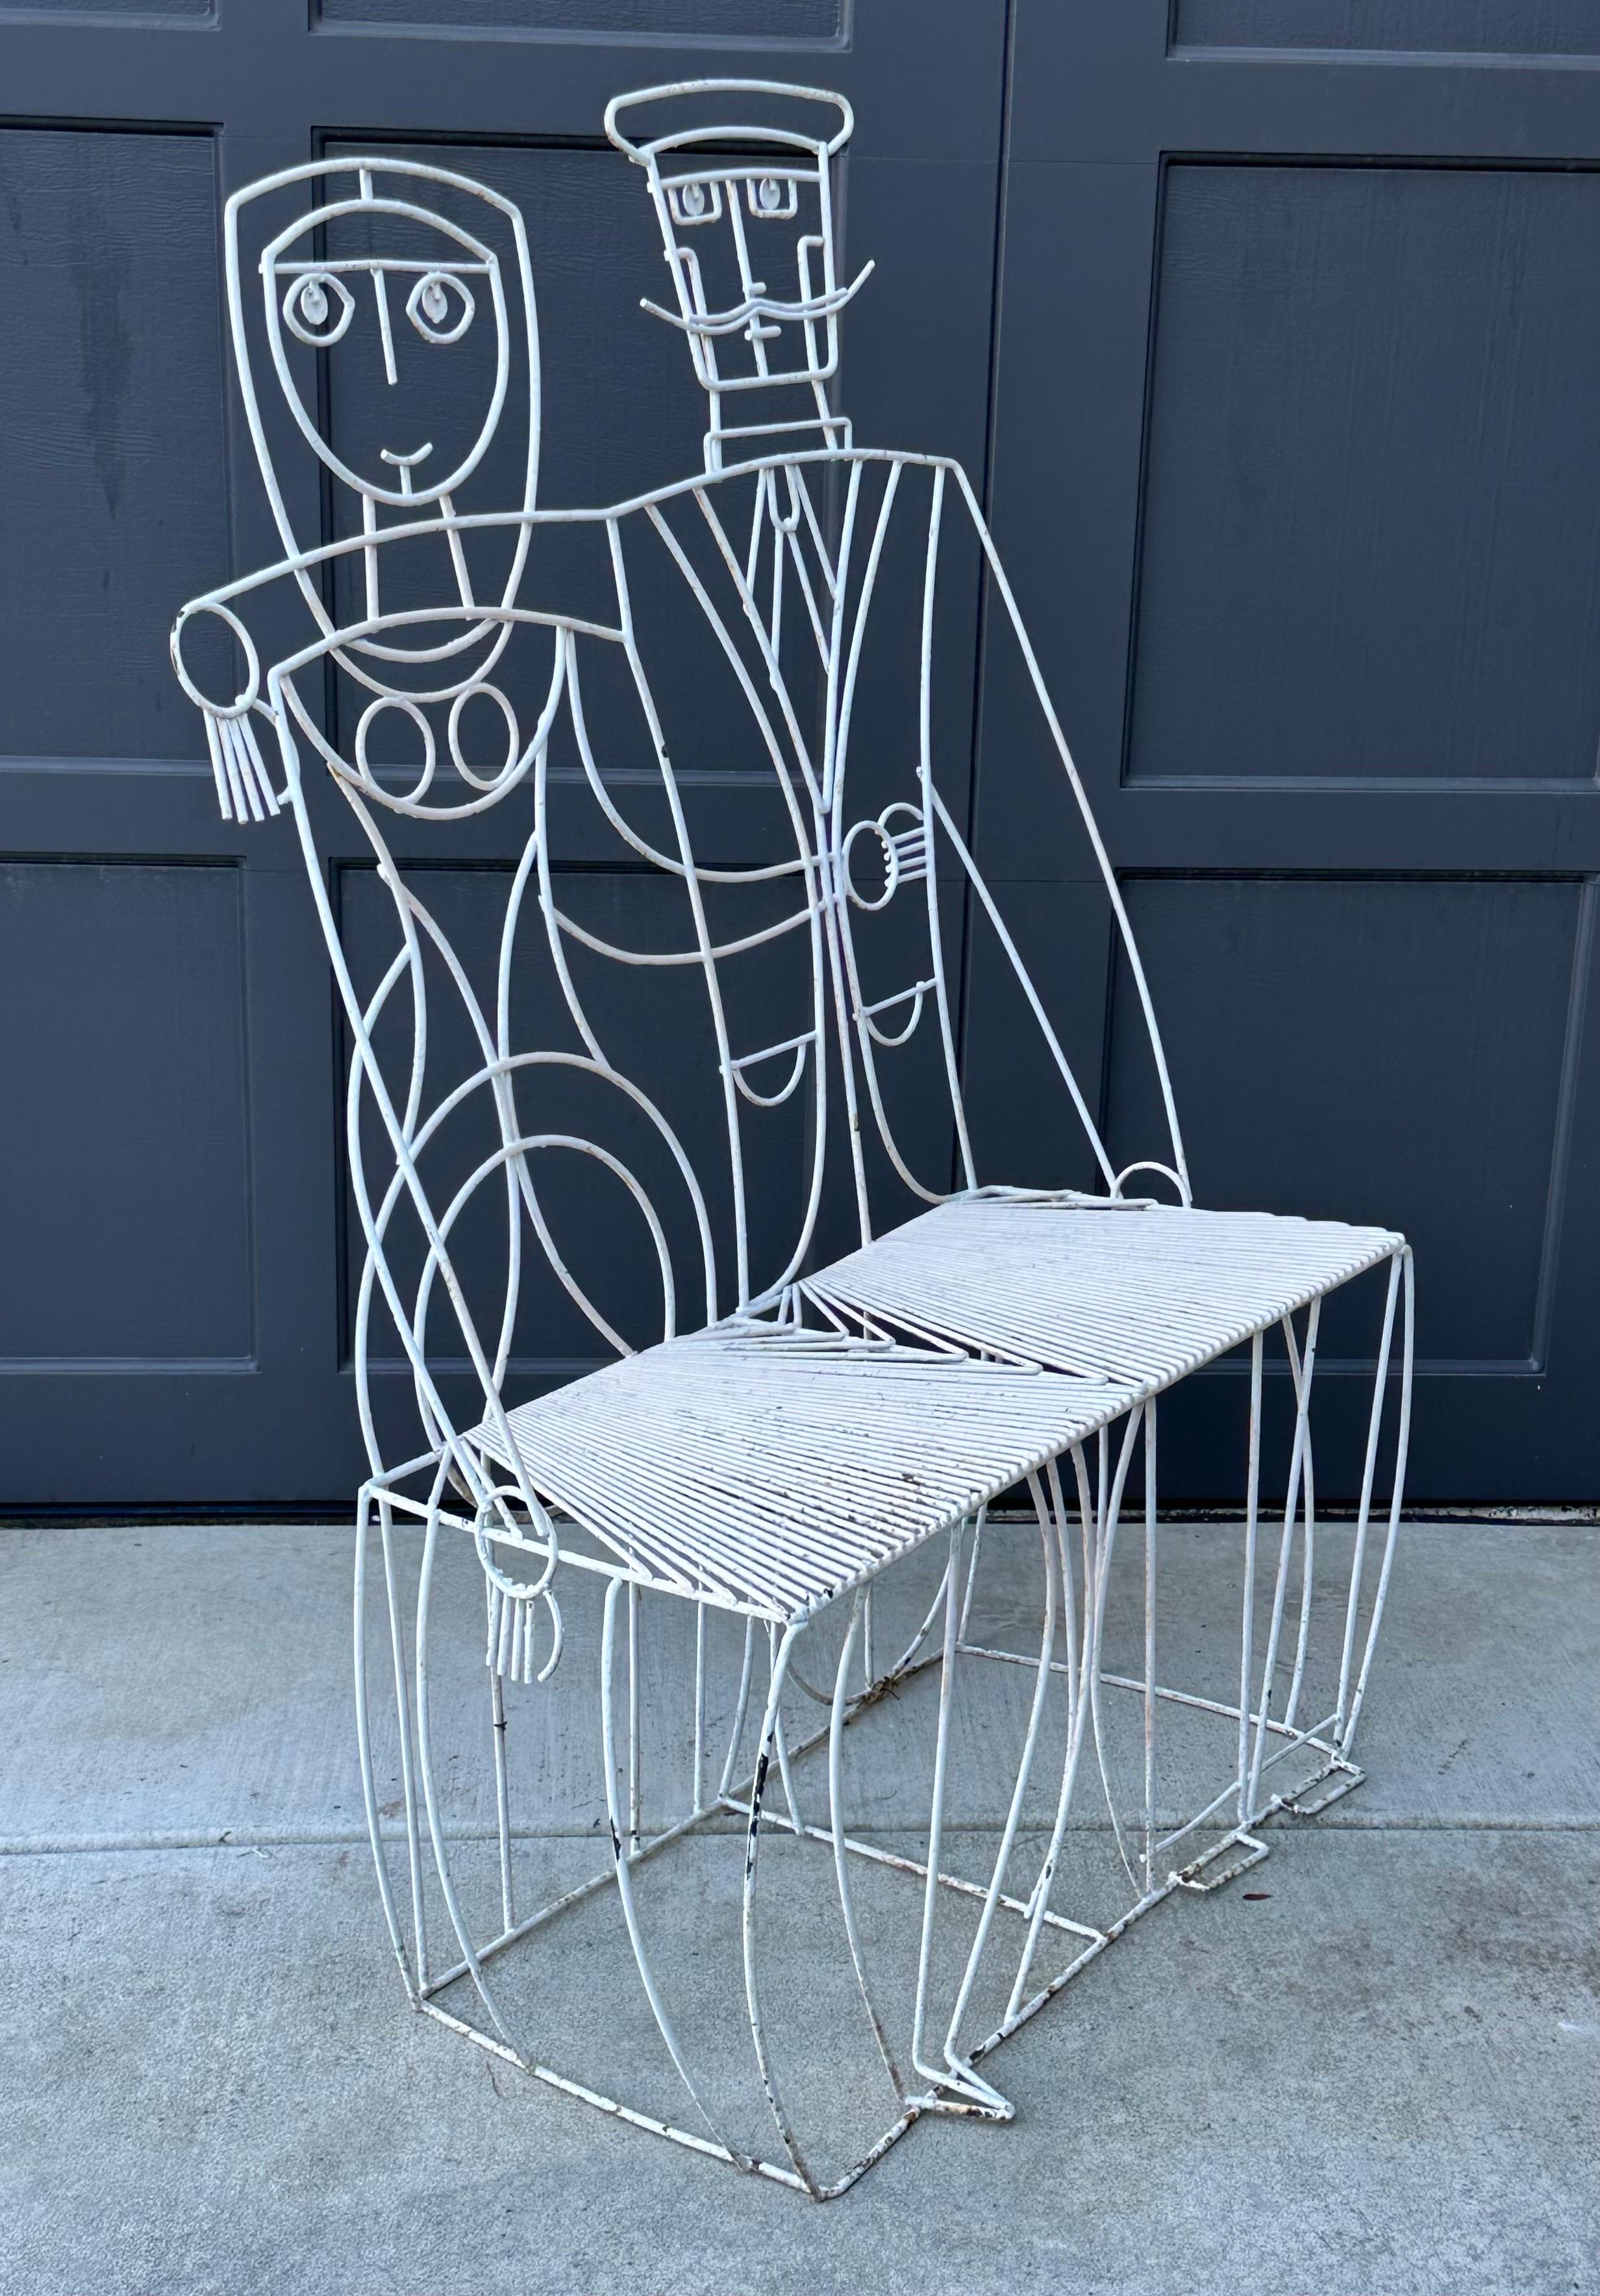 Whimsical Vintage Man & Woman Metal Wire Bench by John Risley In Fair Condition For Sale In San Diego, CA